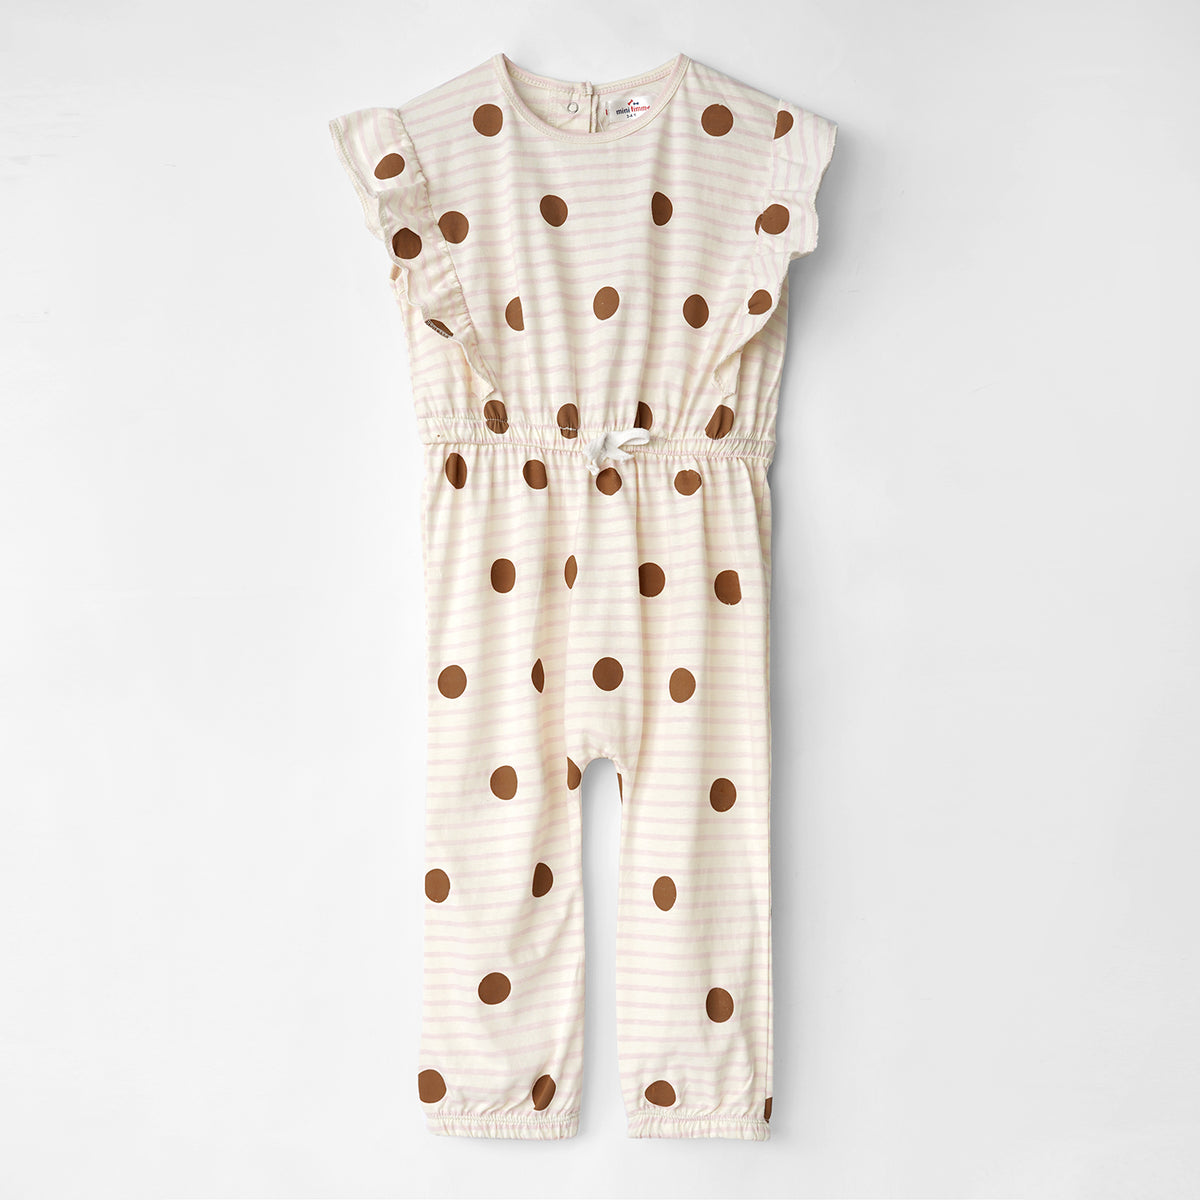 Girls Fashion All-Over Polka Dots Printed Soft Cotton Frill Stripe Jumpsuit